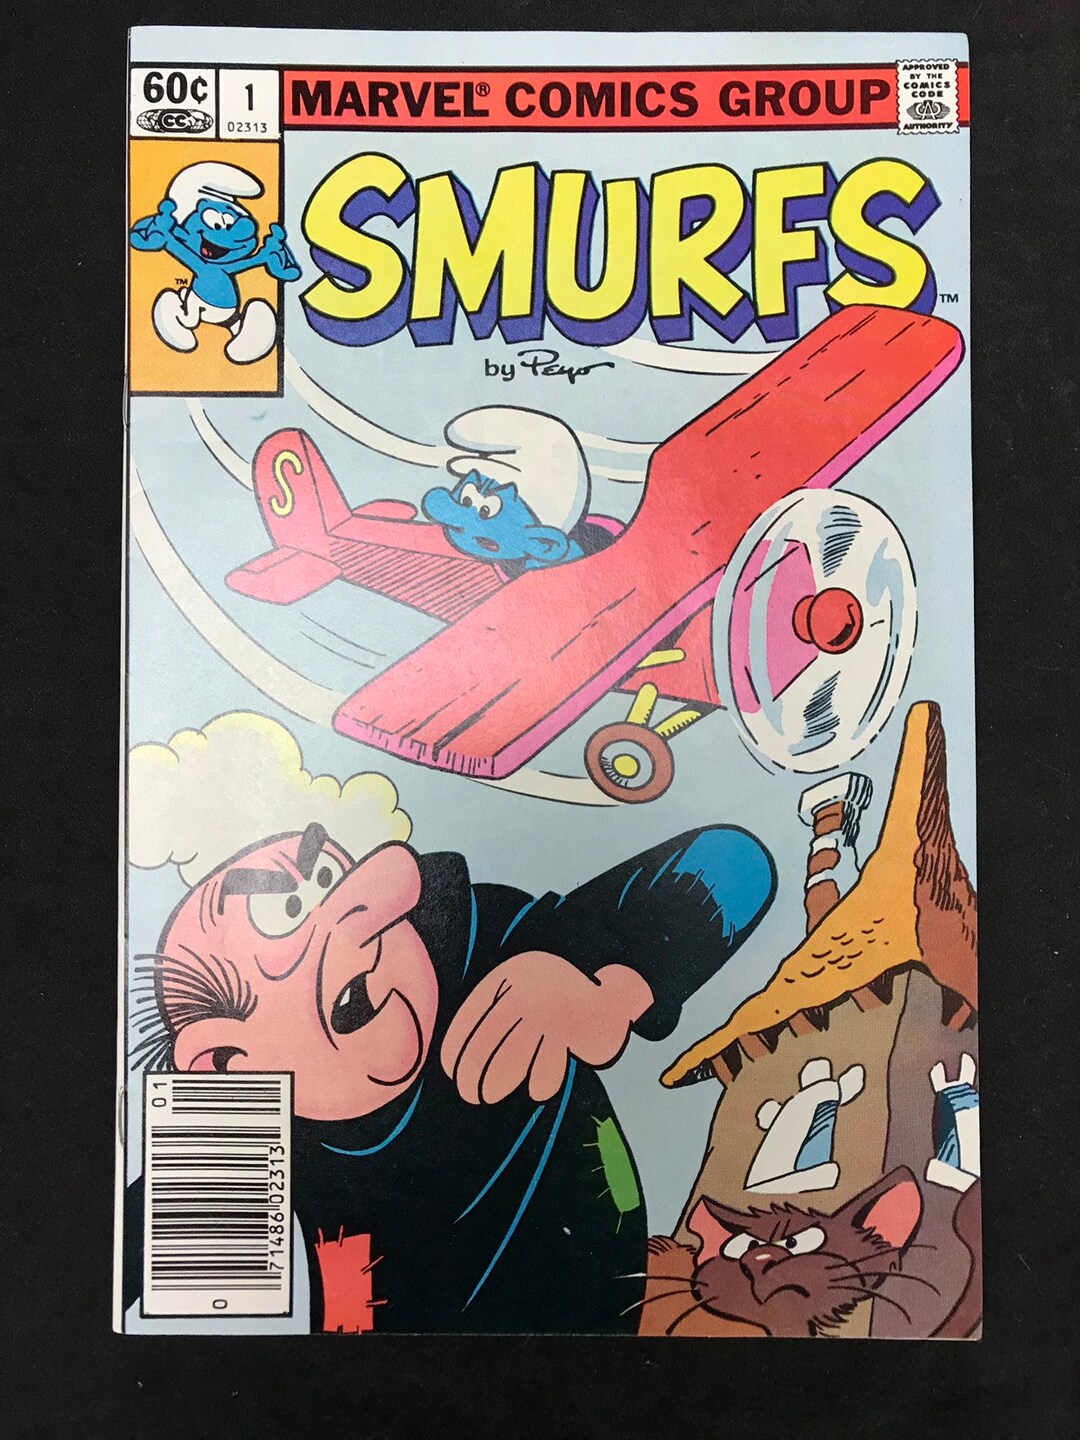 Vtg　by　Smurfs　NOS　Etsy　Comic　Volume　Hong　Cent　Peyo　60　Fine　Issue　Very　Kong